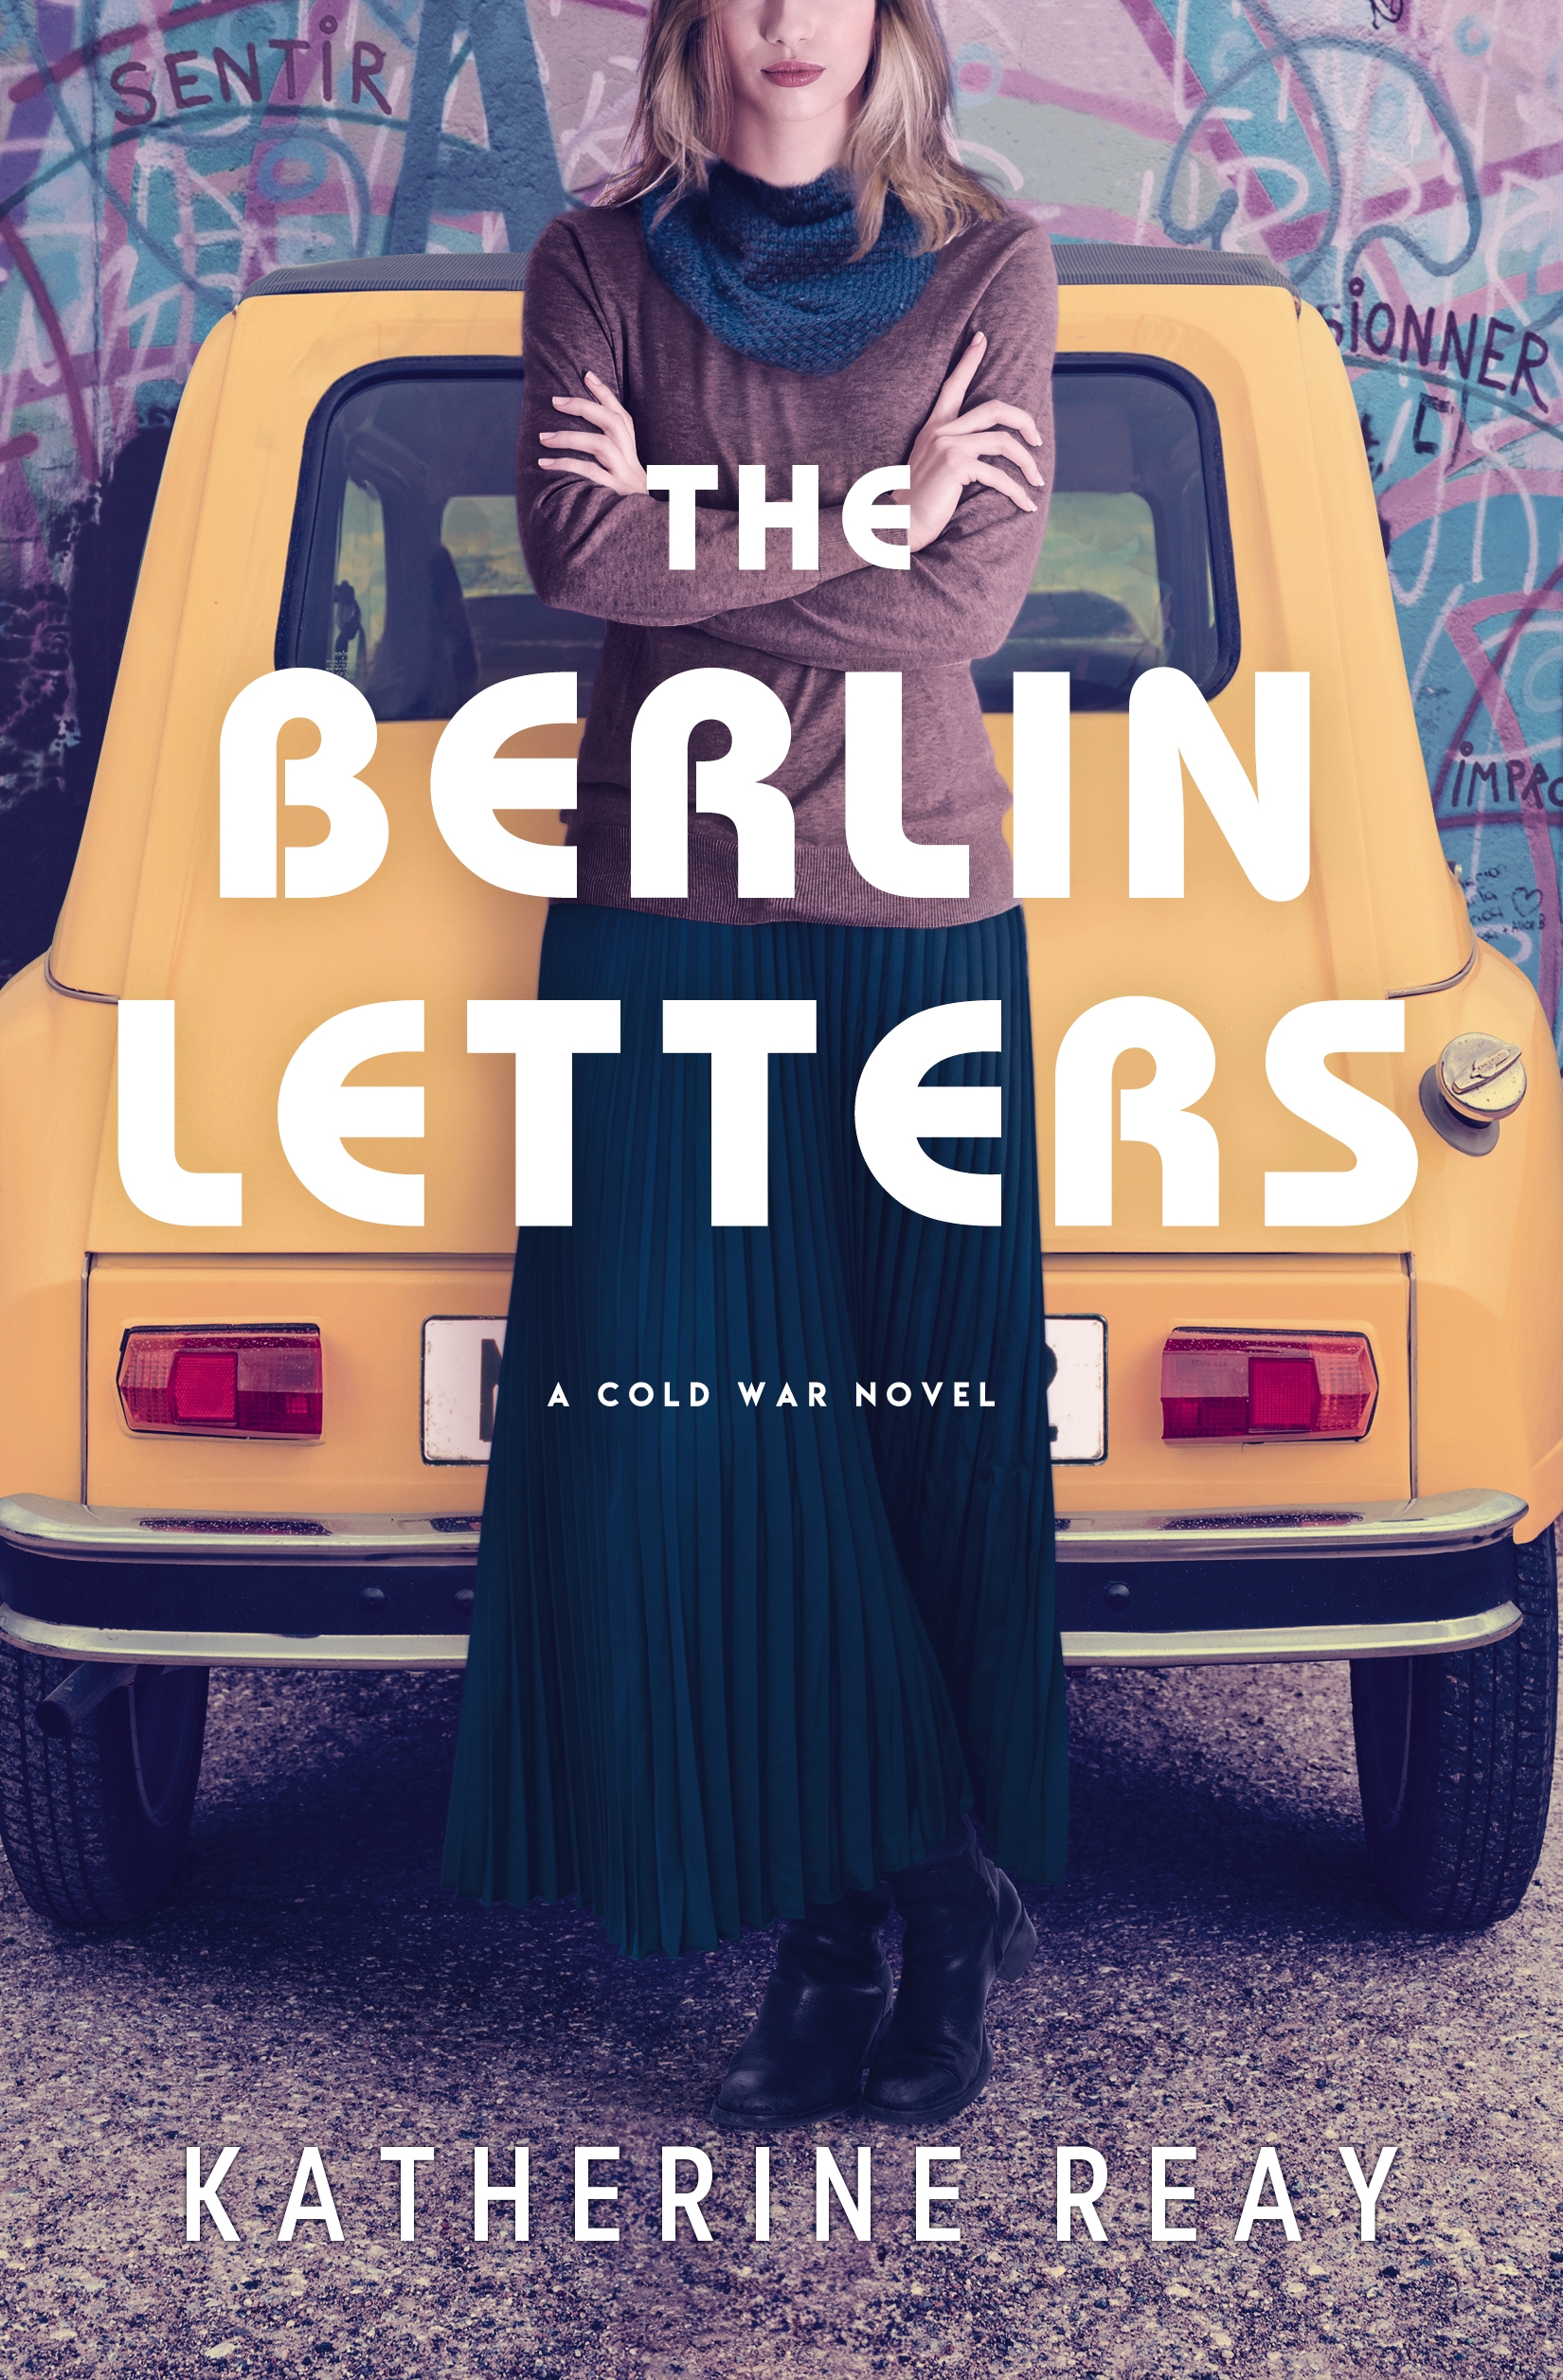 THE BERLIN LETTERS